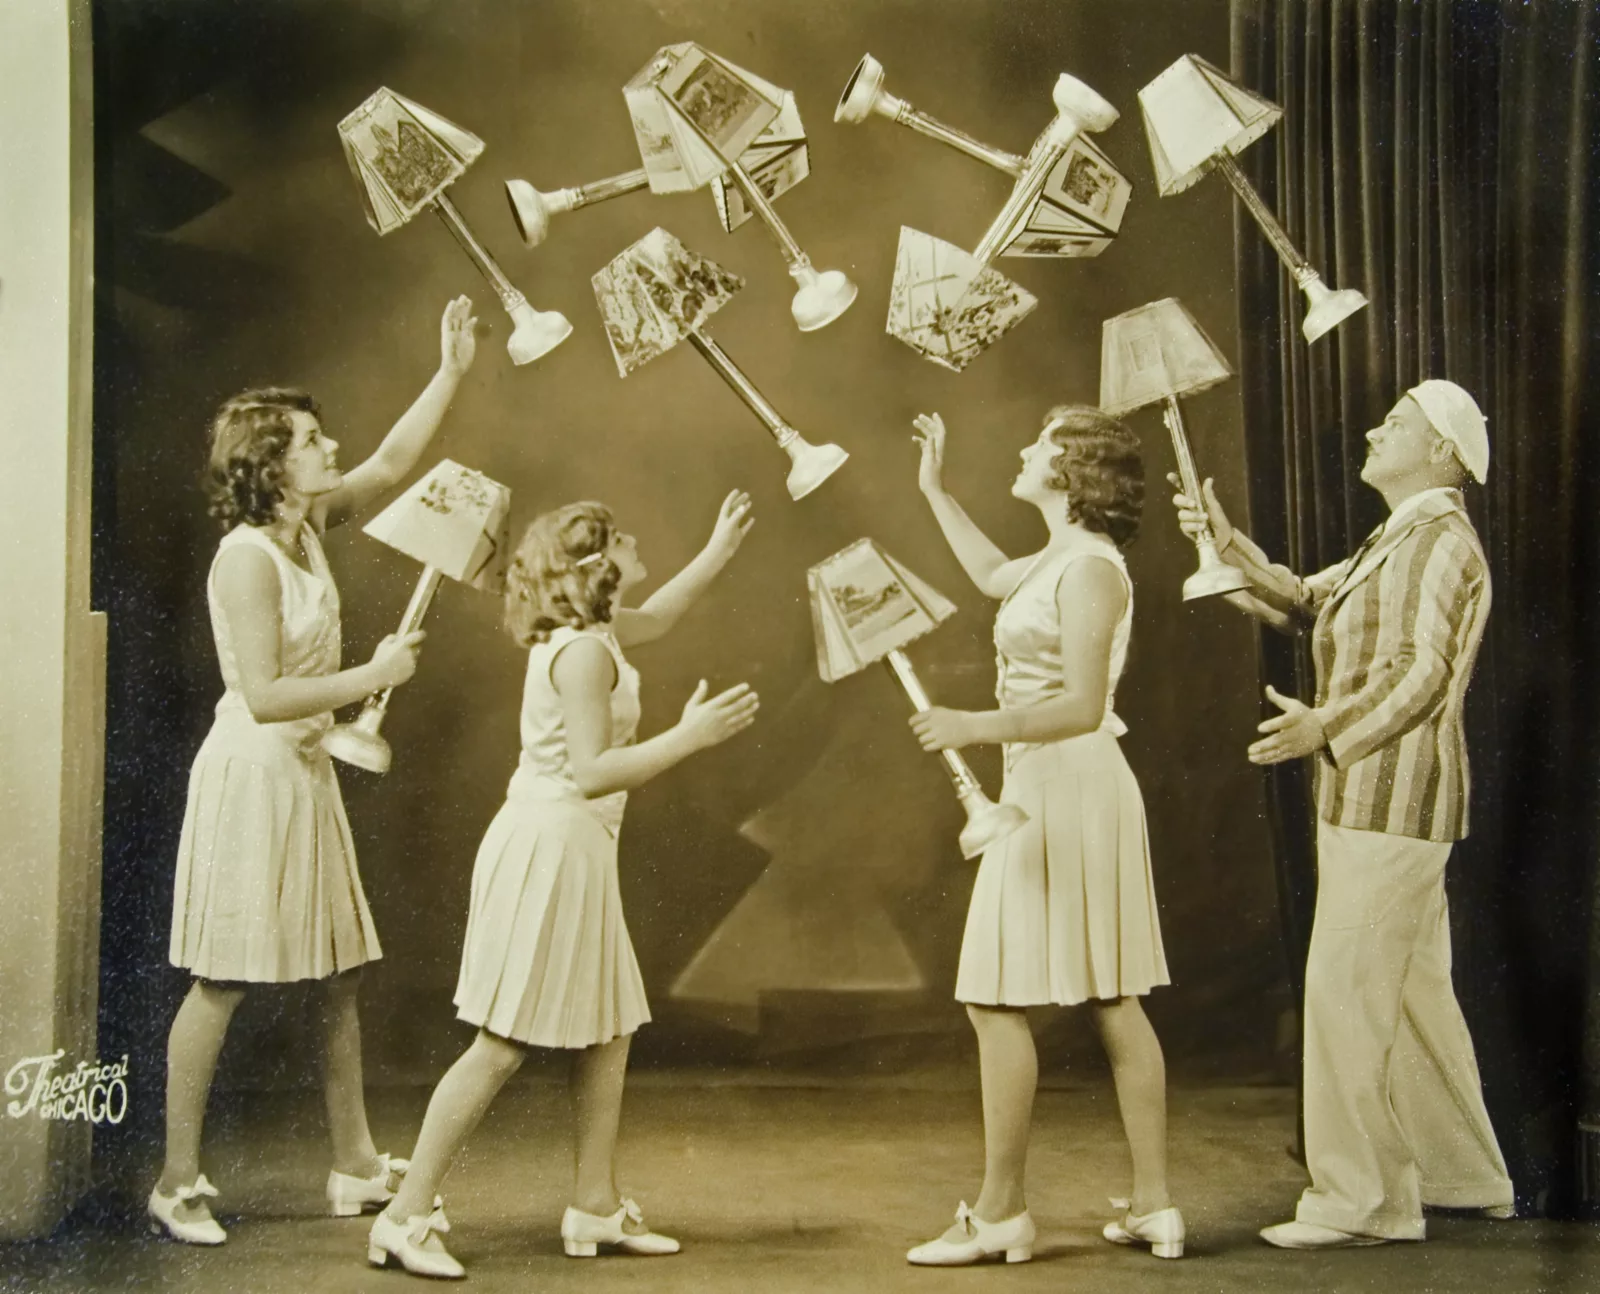 Four members of the Clarke Family juggle several lamps with shades.